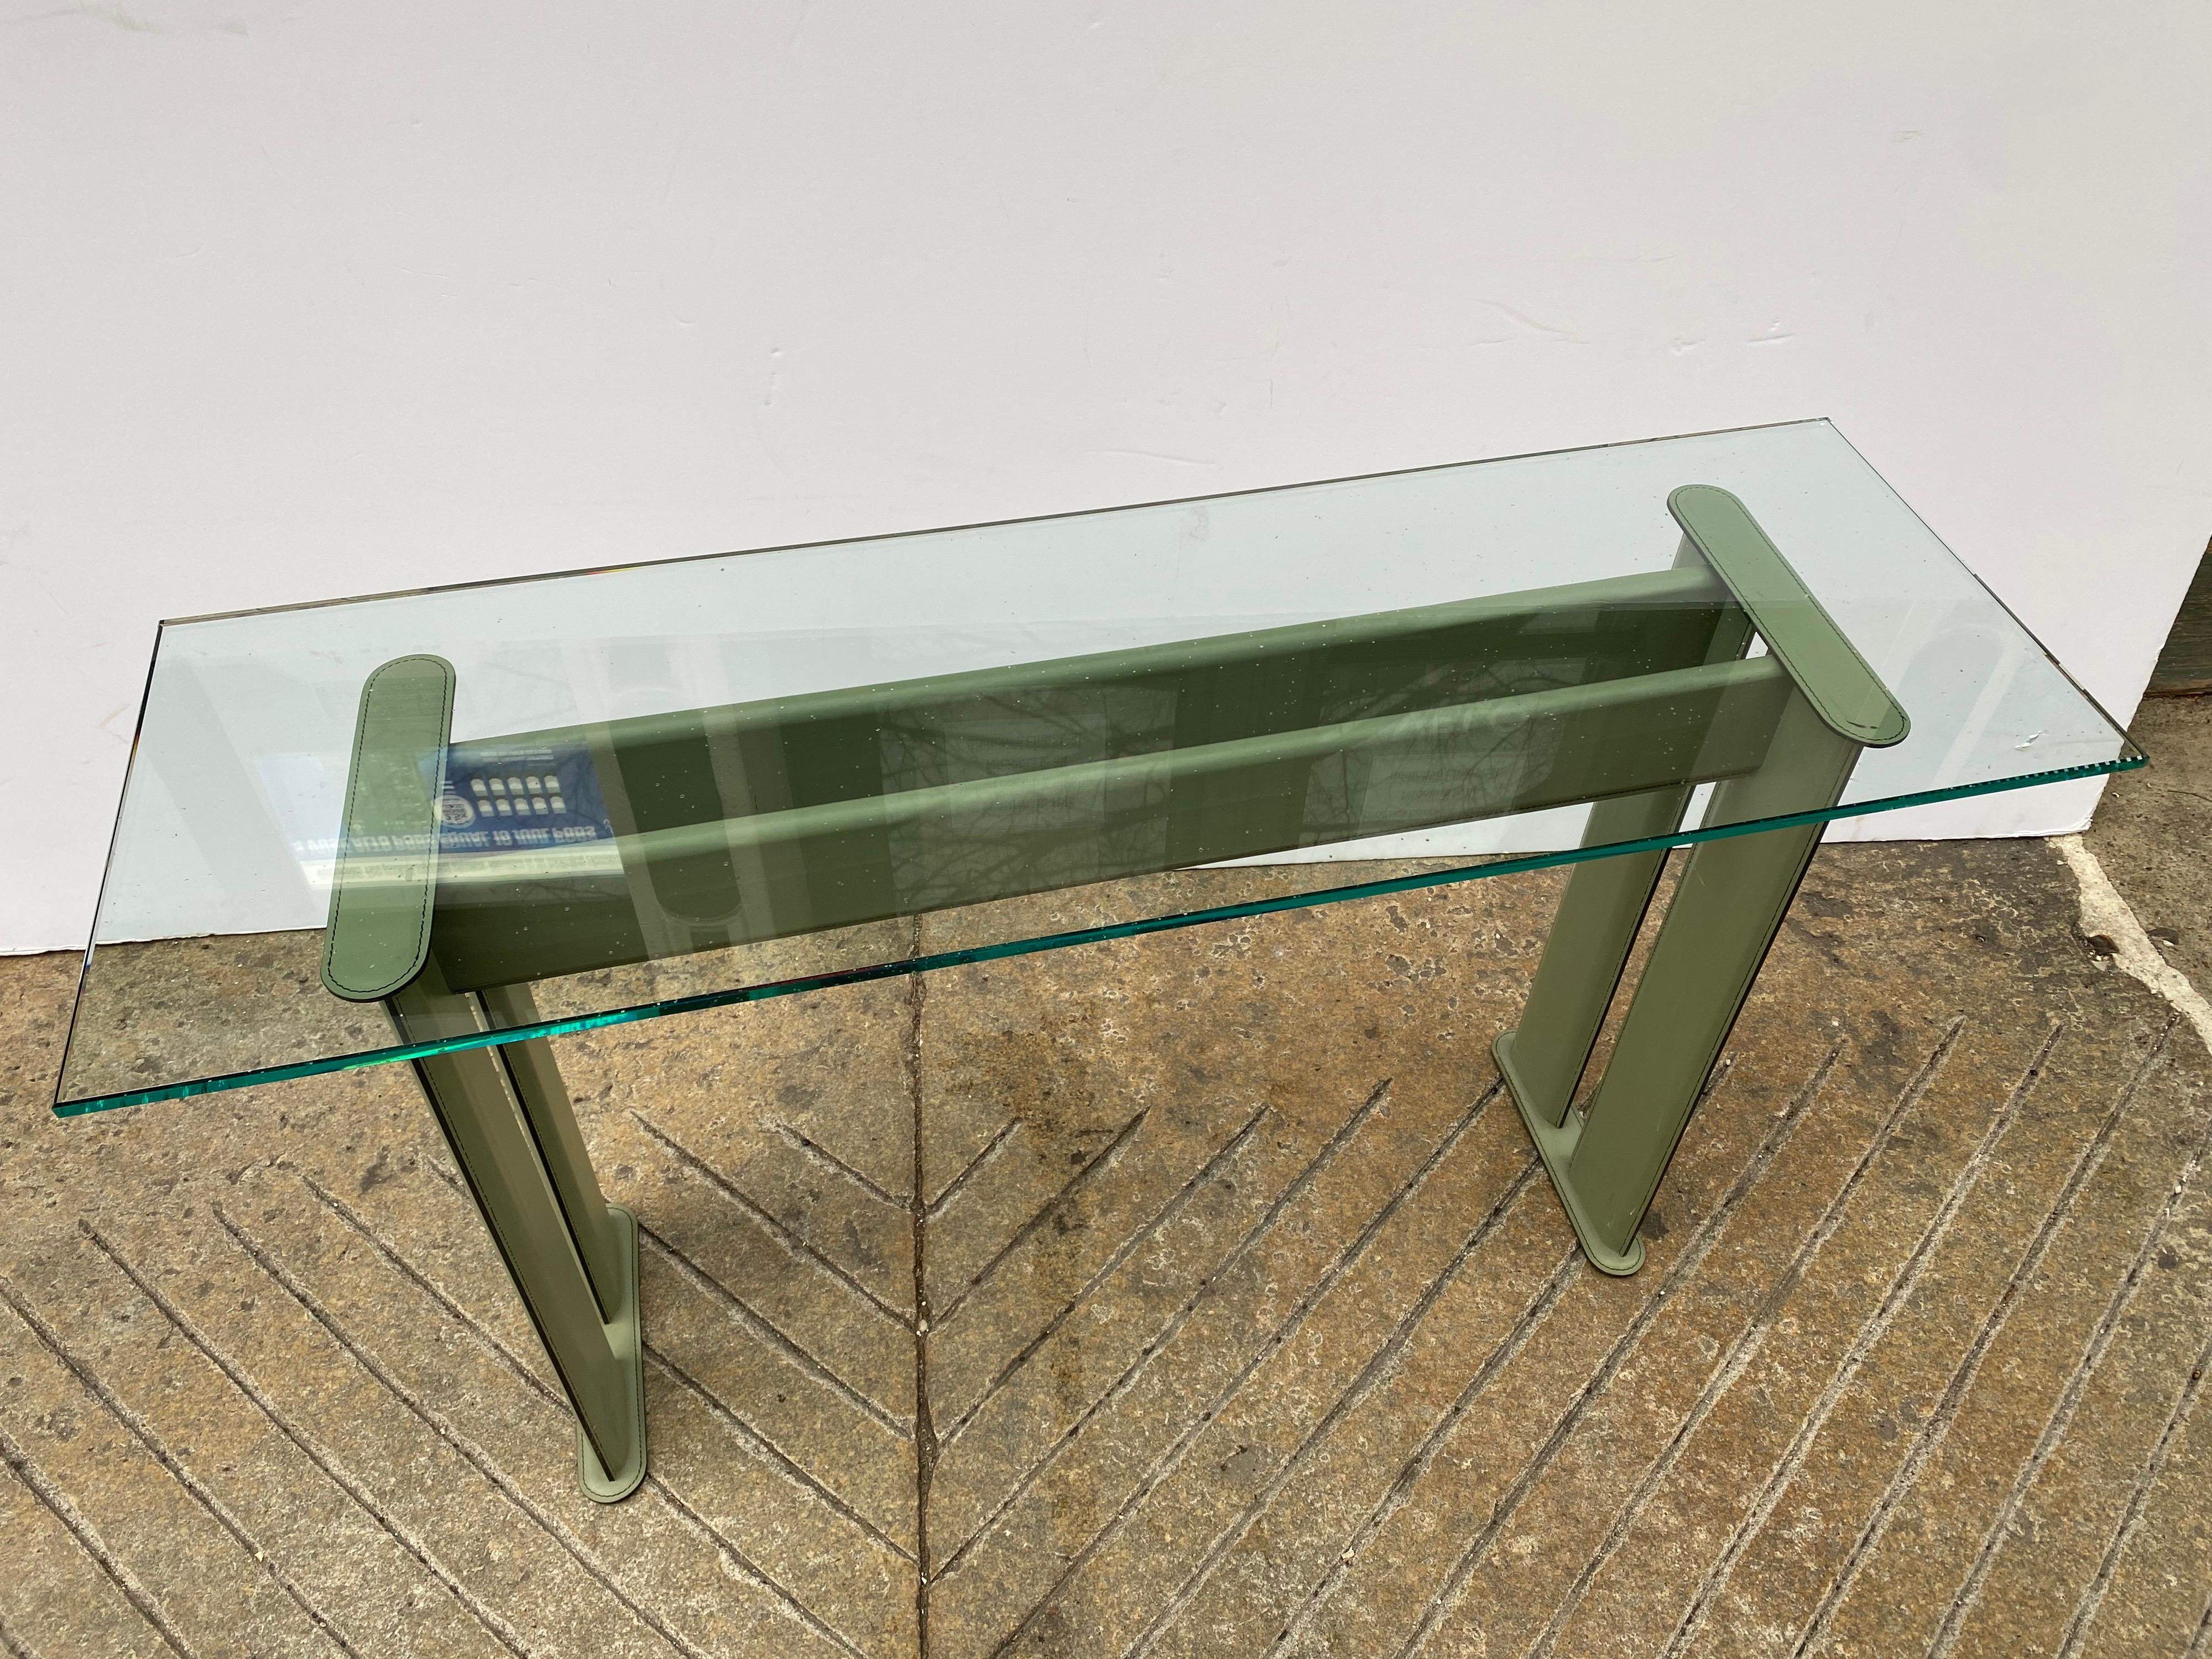 Leather Clad console with a new glass top. Designed by De Couro of Brazil. Dating to the late 1980's. Nice Condition with a simple Mario Bellini Aesthetic. Sage Green Leather with a Brand New Glass Top. Nice Scale, perfect behind a sofa or in an